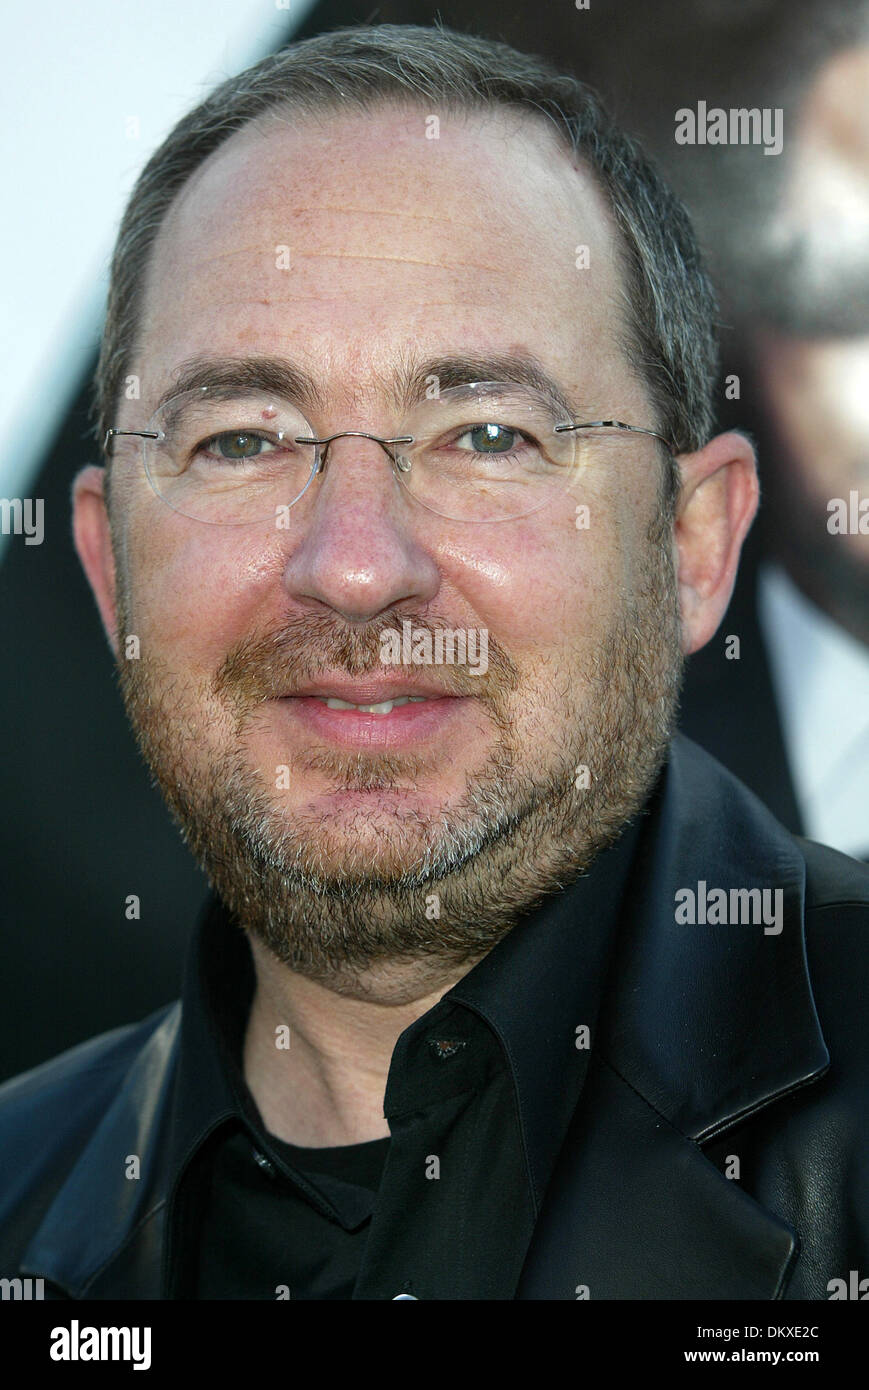 BARRY SONNENFELD.FILM DIRECTOR.WESTWOOD, LOS ANGELES, USA.26/06/2002.LAB5485. Stock Photo